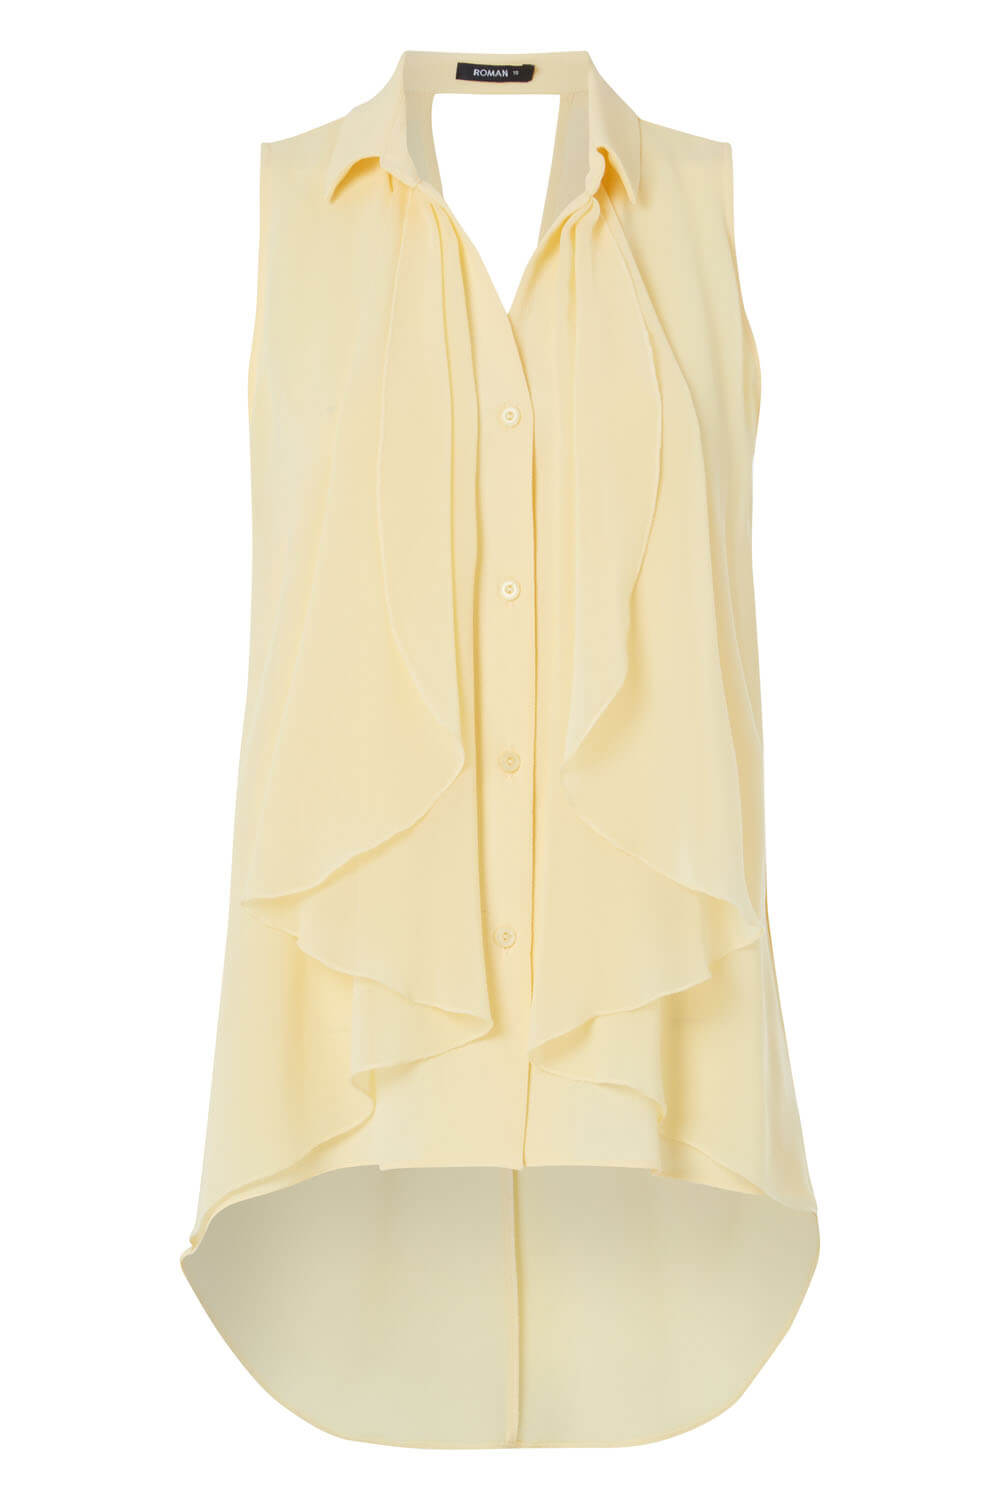 Lemon  Waterfall Front Button Up Blouse, Image 5 of 5